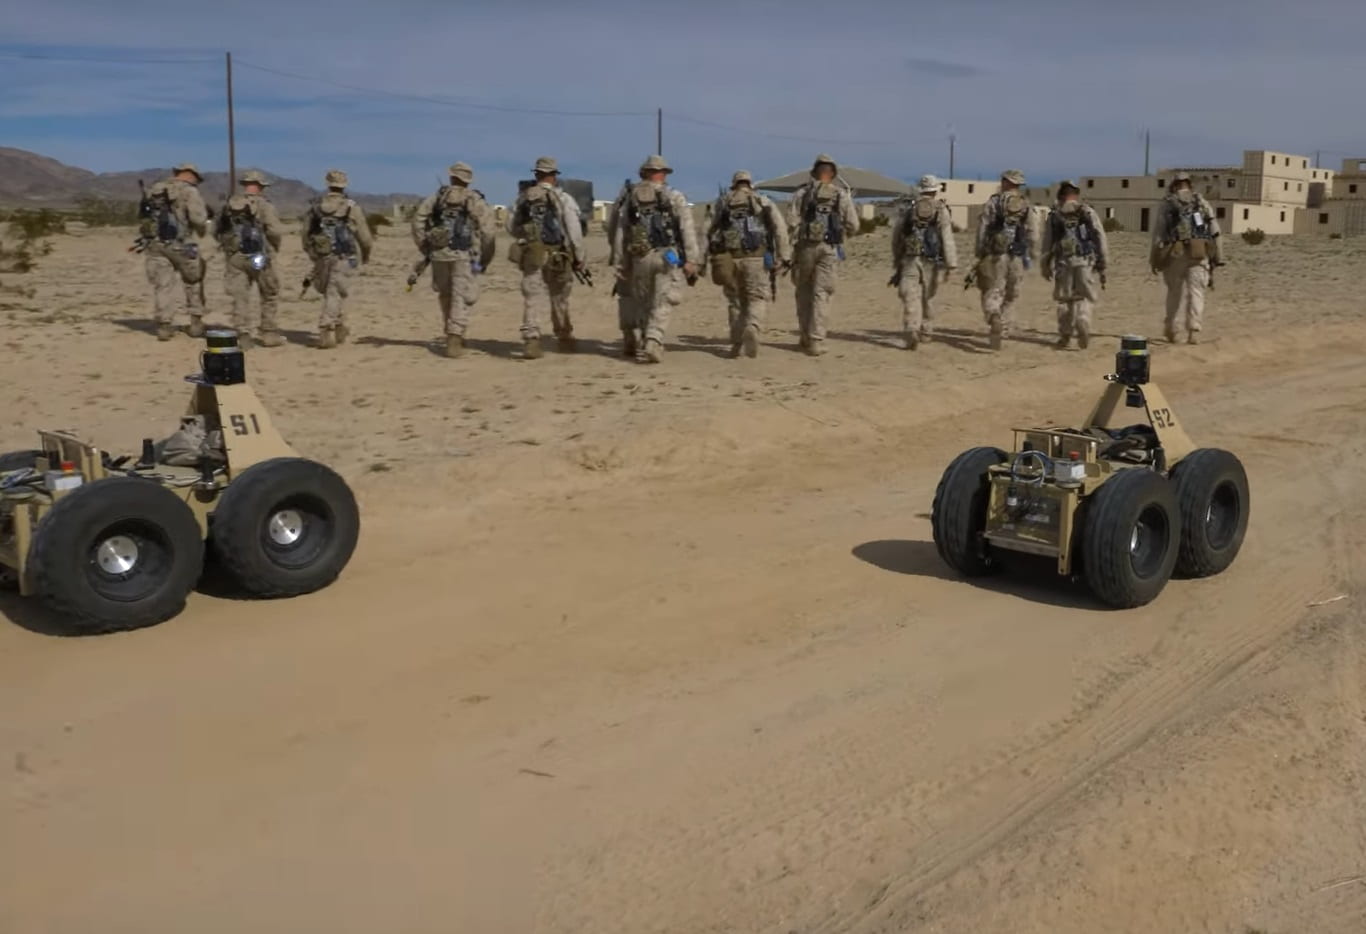 DARPA demonstrates warfighting force with artificial intelligence as a true partner